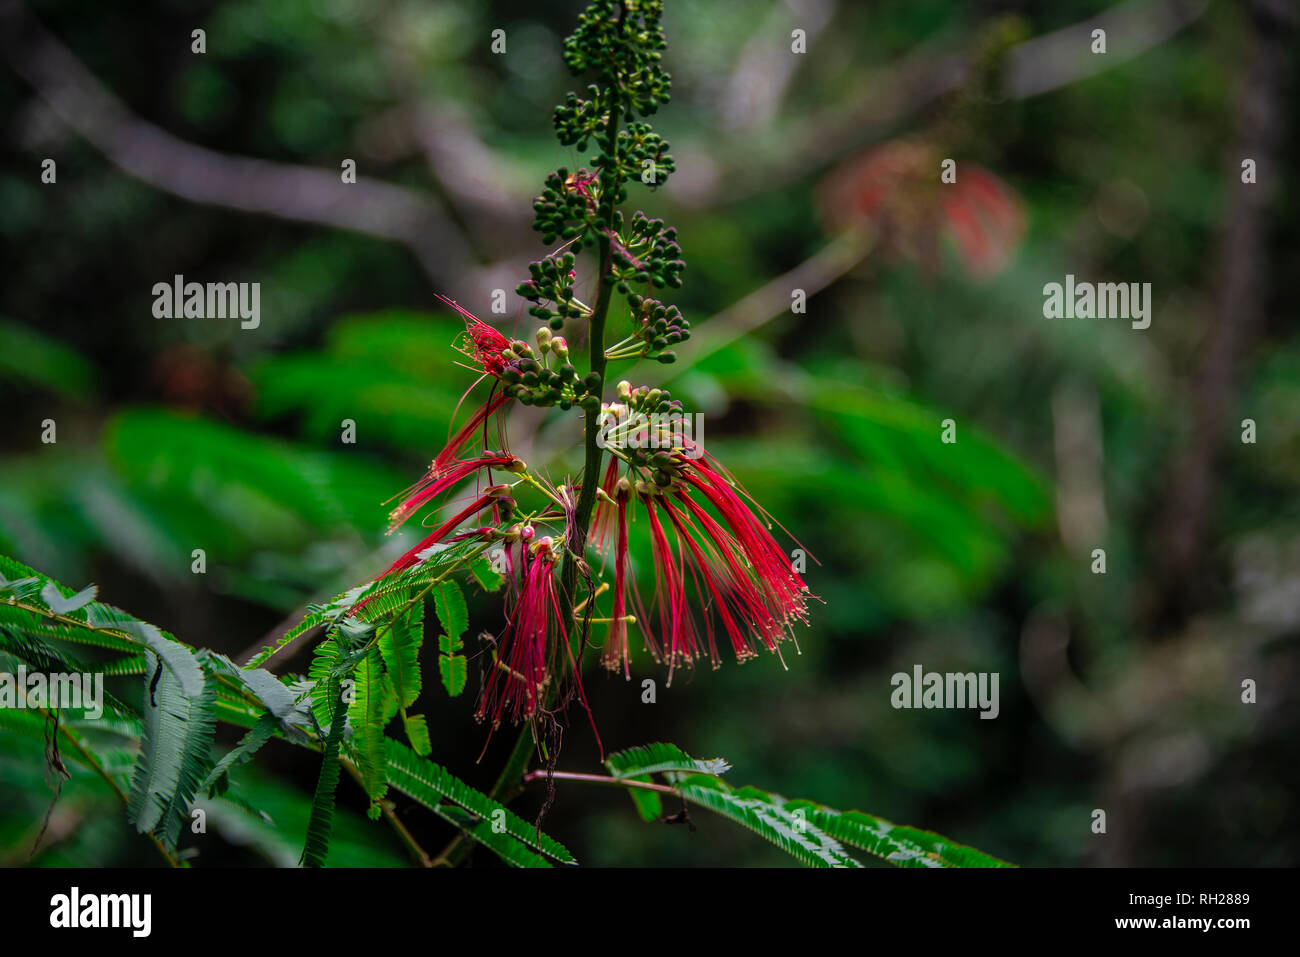 Red tropical jungle flower Stock Photo